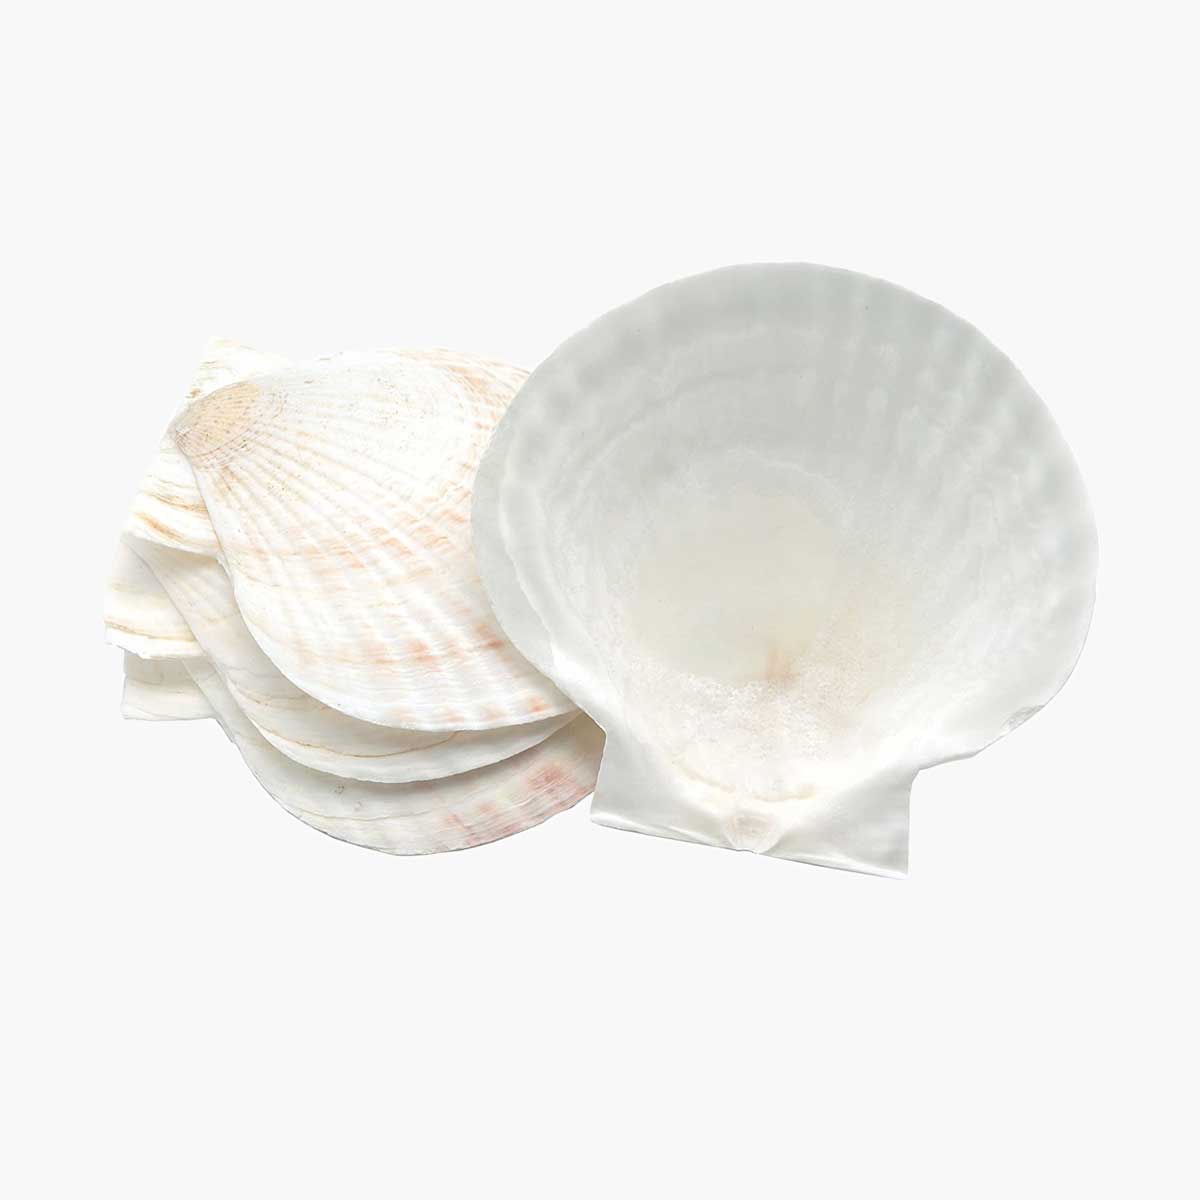 Scallop serving shells for the 70s dinner party.